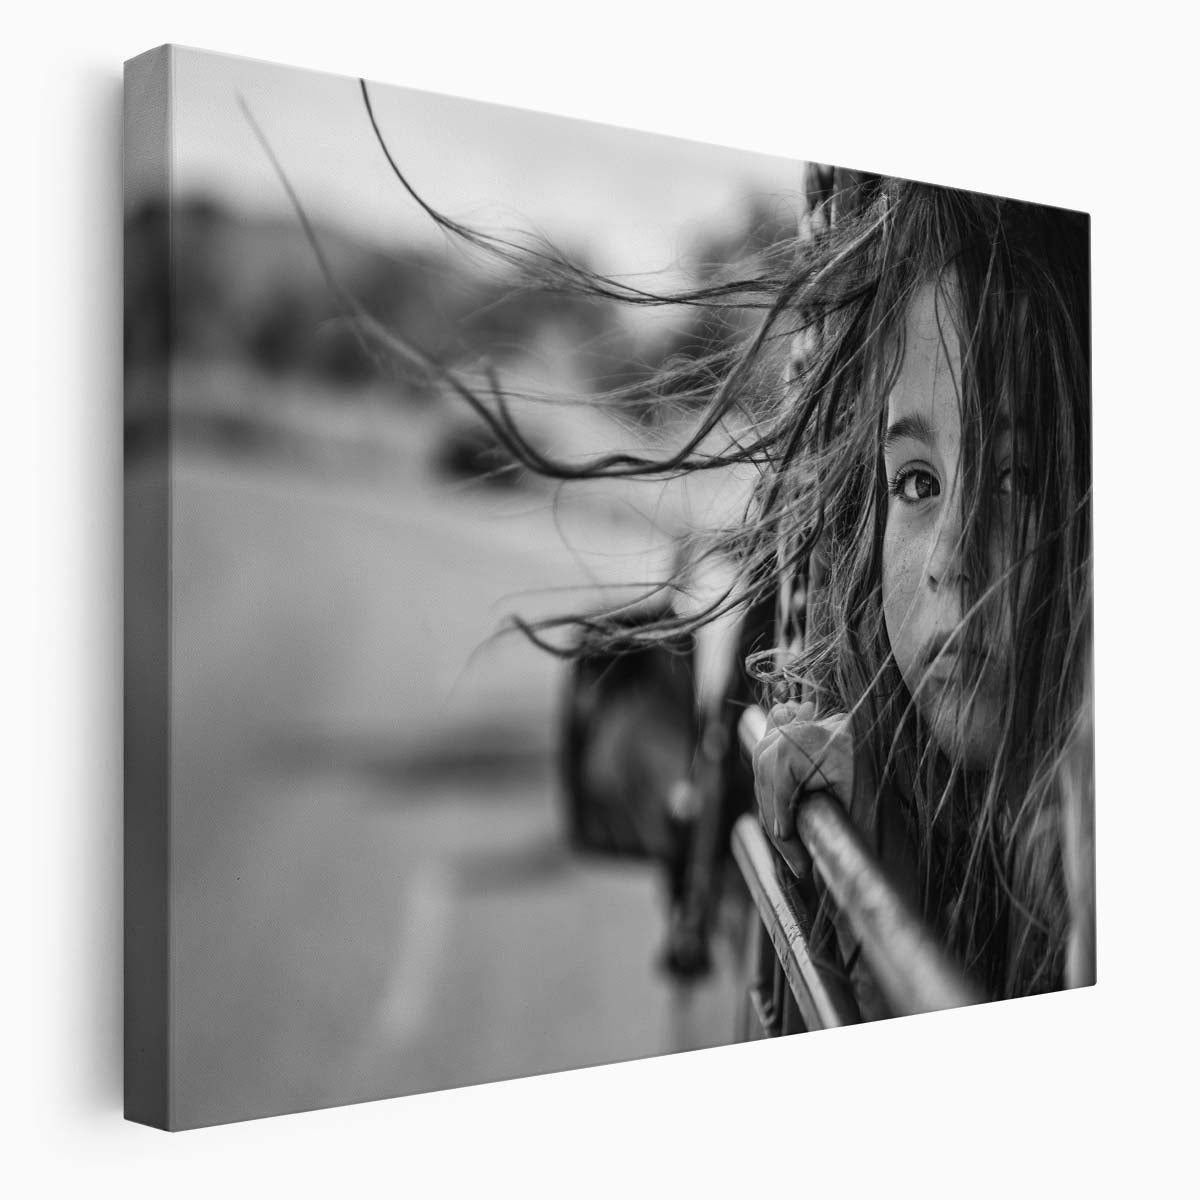 WindSwept Girl Portrait in Monochrome Wall Art by Luxuriance Designs. Made in USA.